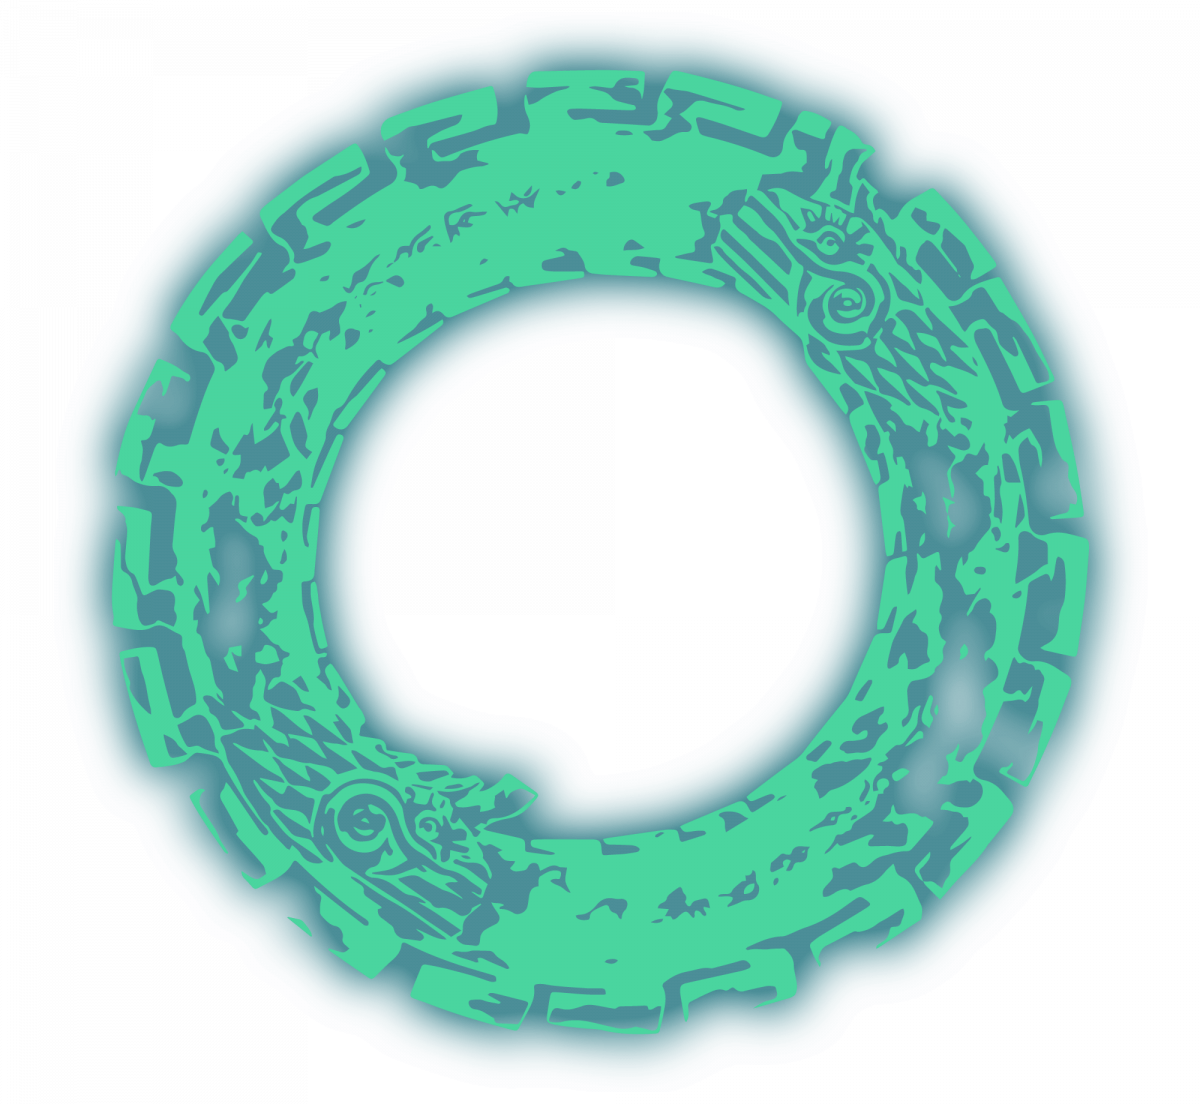 The Ouroboros Logo from TOTK